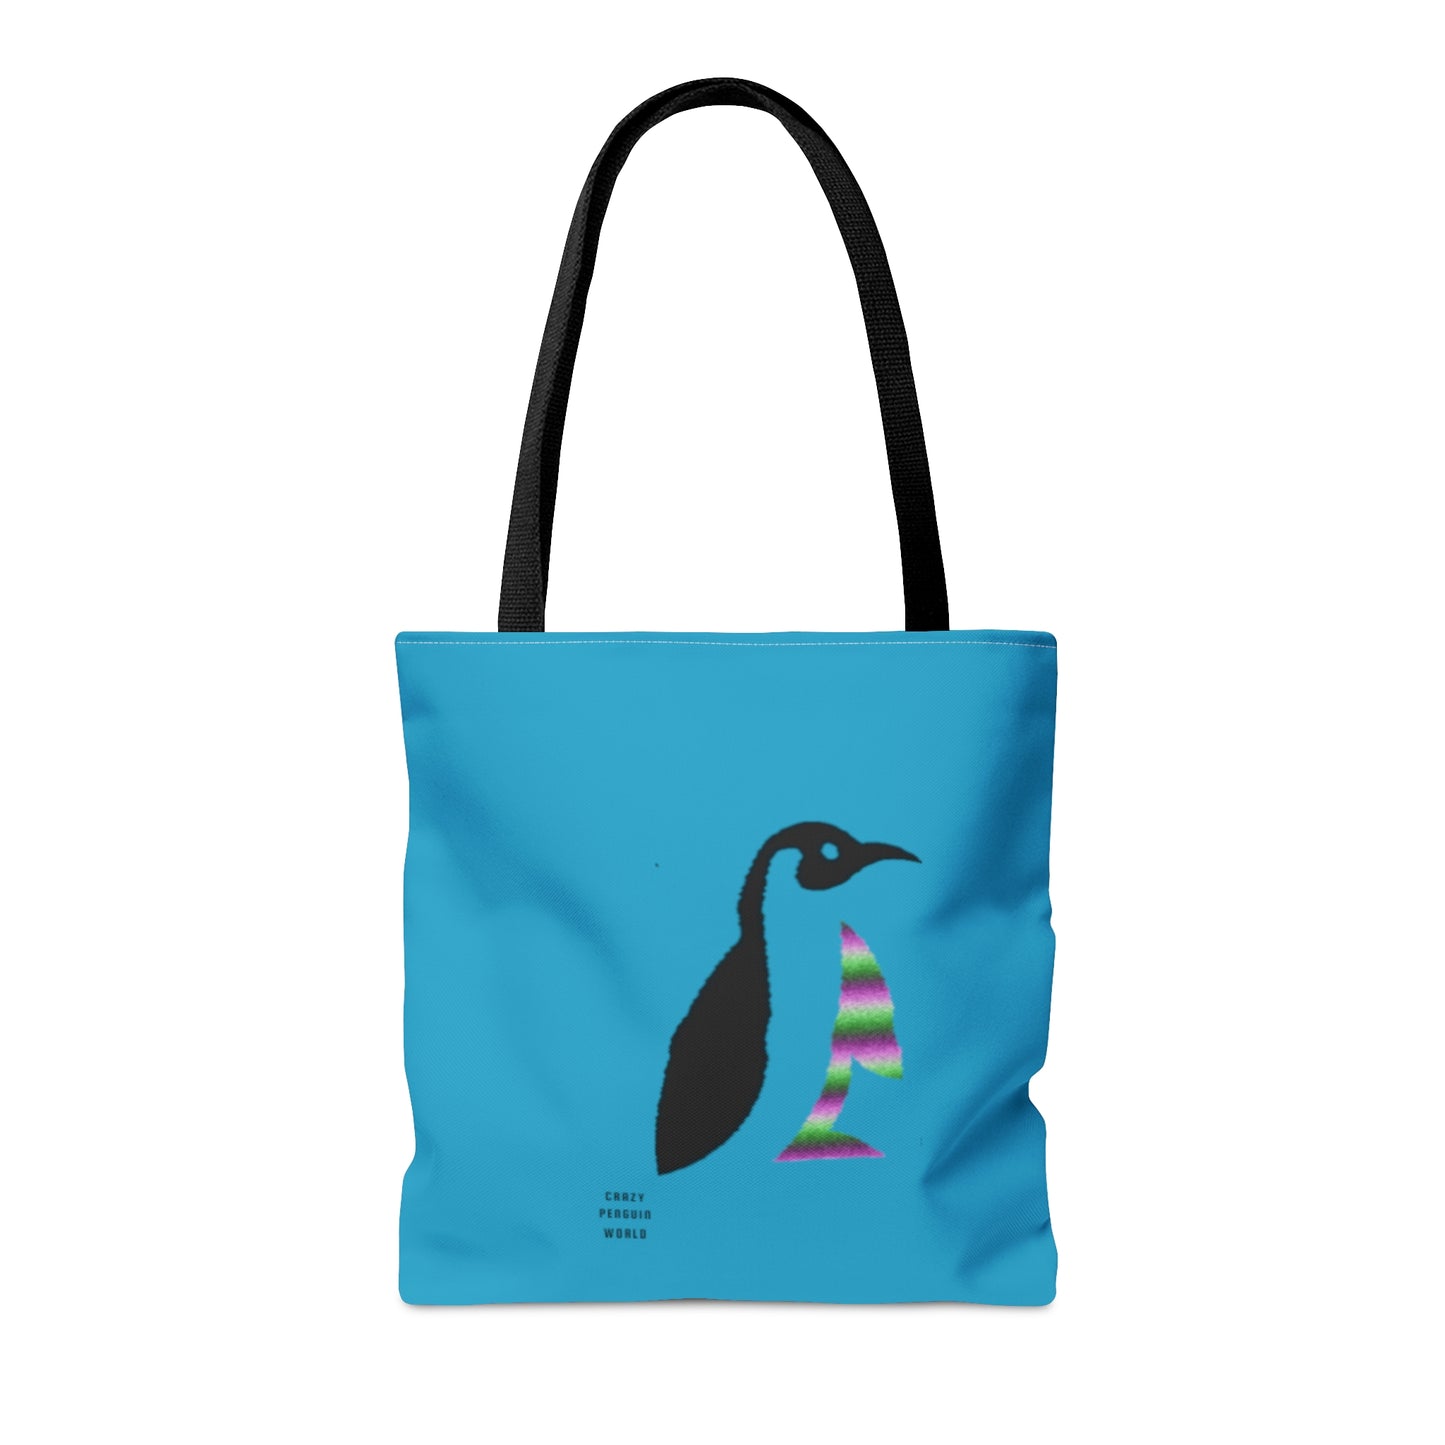 Tote Bag: Lost Remember Honor Turquoise